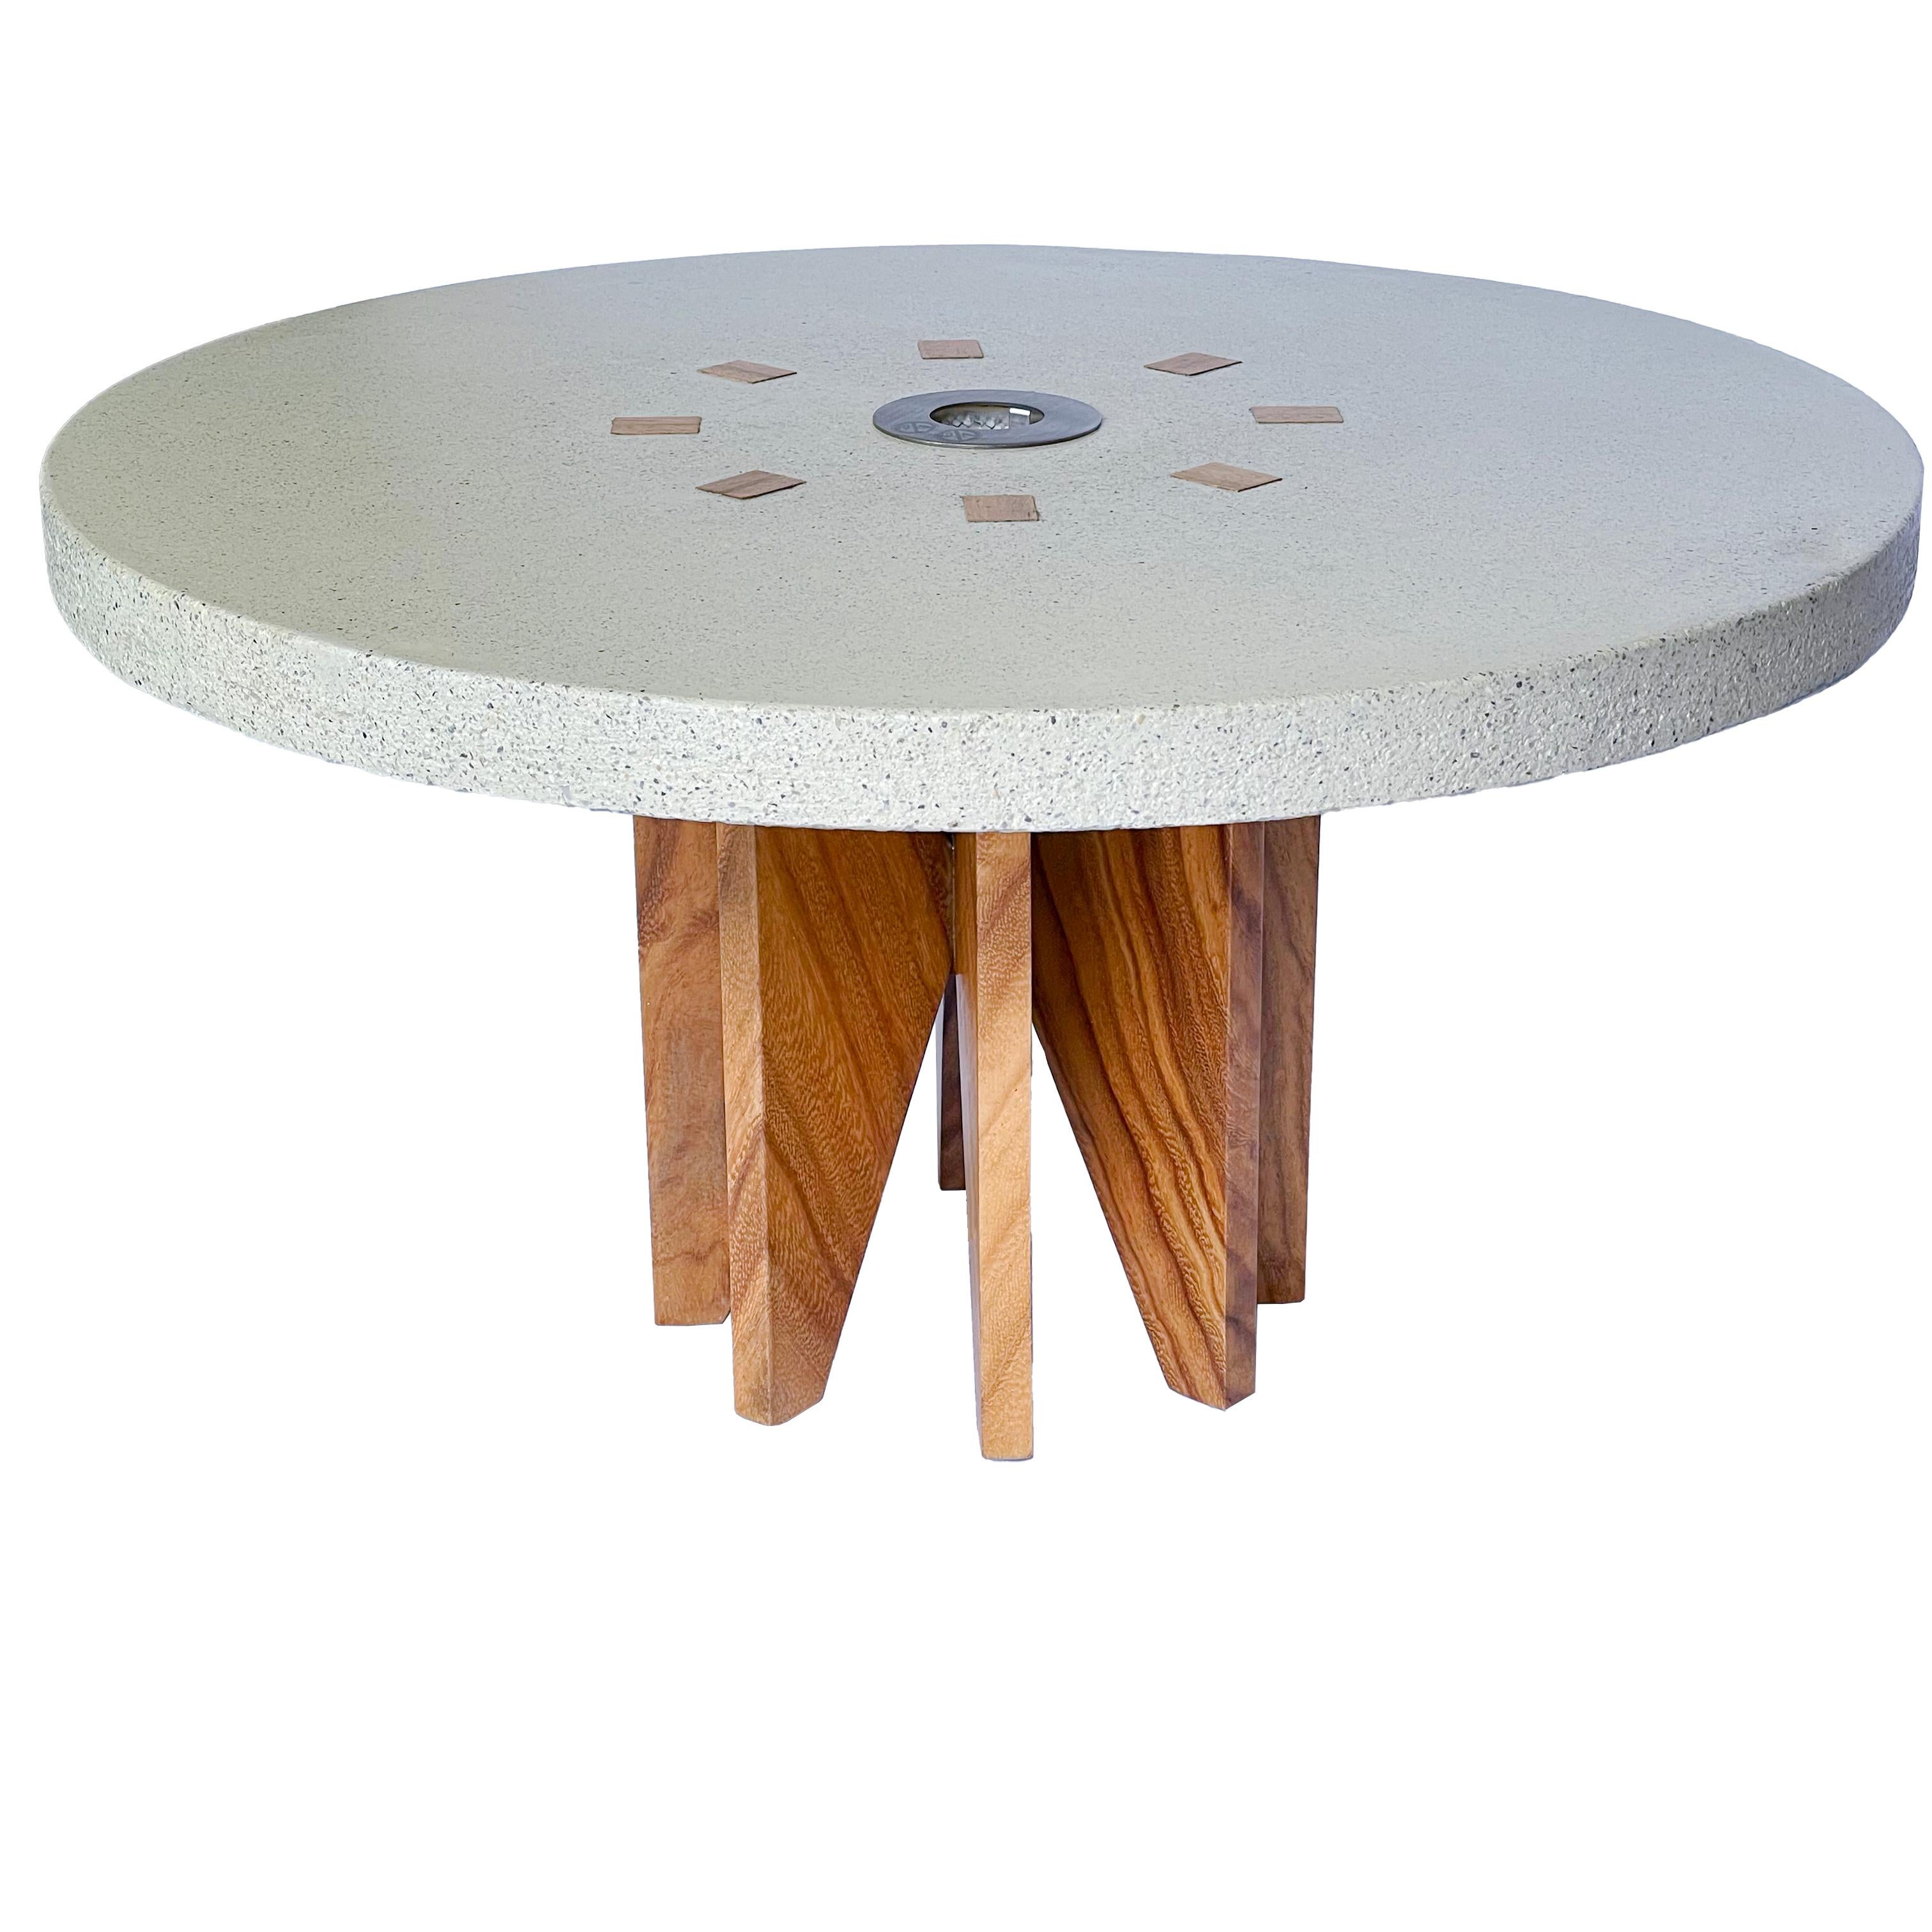 Guatemalan Modern Wood and Concrete Fire Table top by Pierre Sarkis For Sale